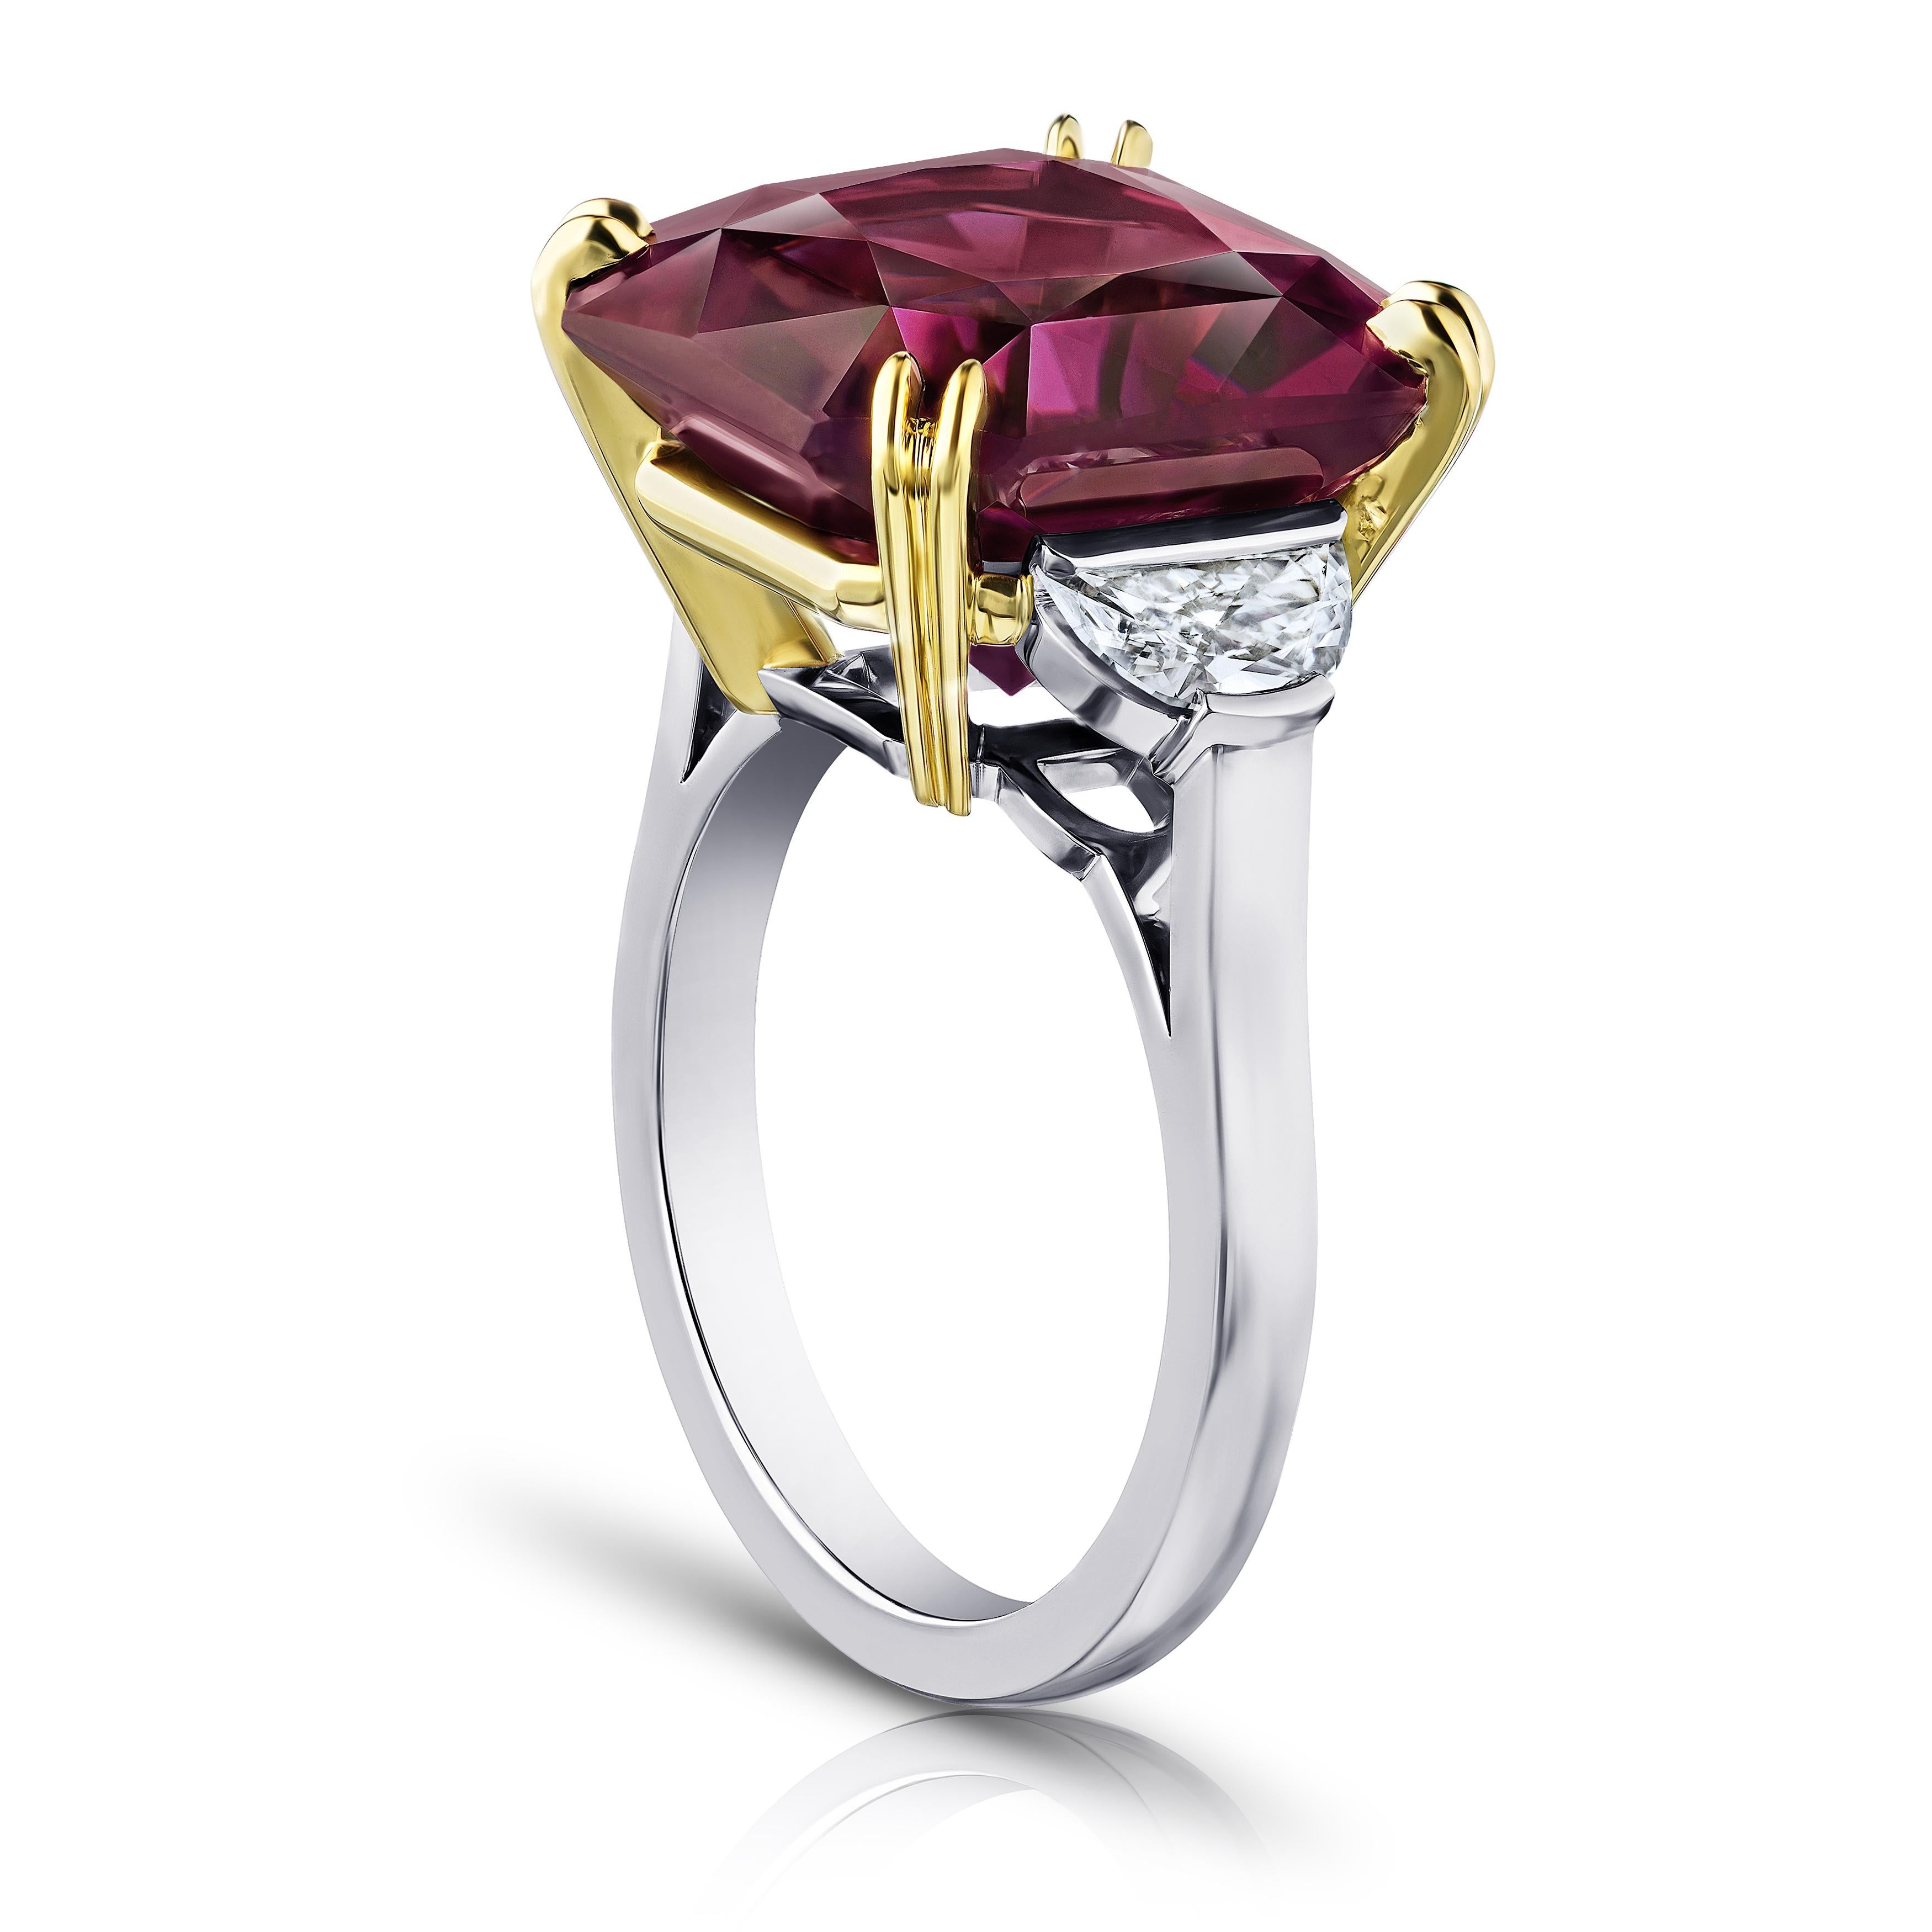 14.61 carat radiant cut purple spinel with half moon diamonds .67 carats set in a platinum ring. Size 7.
